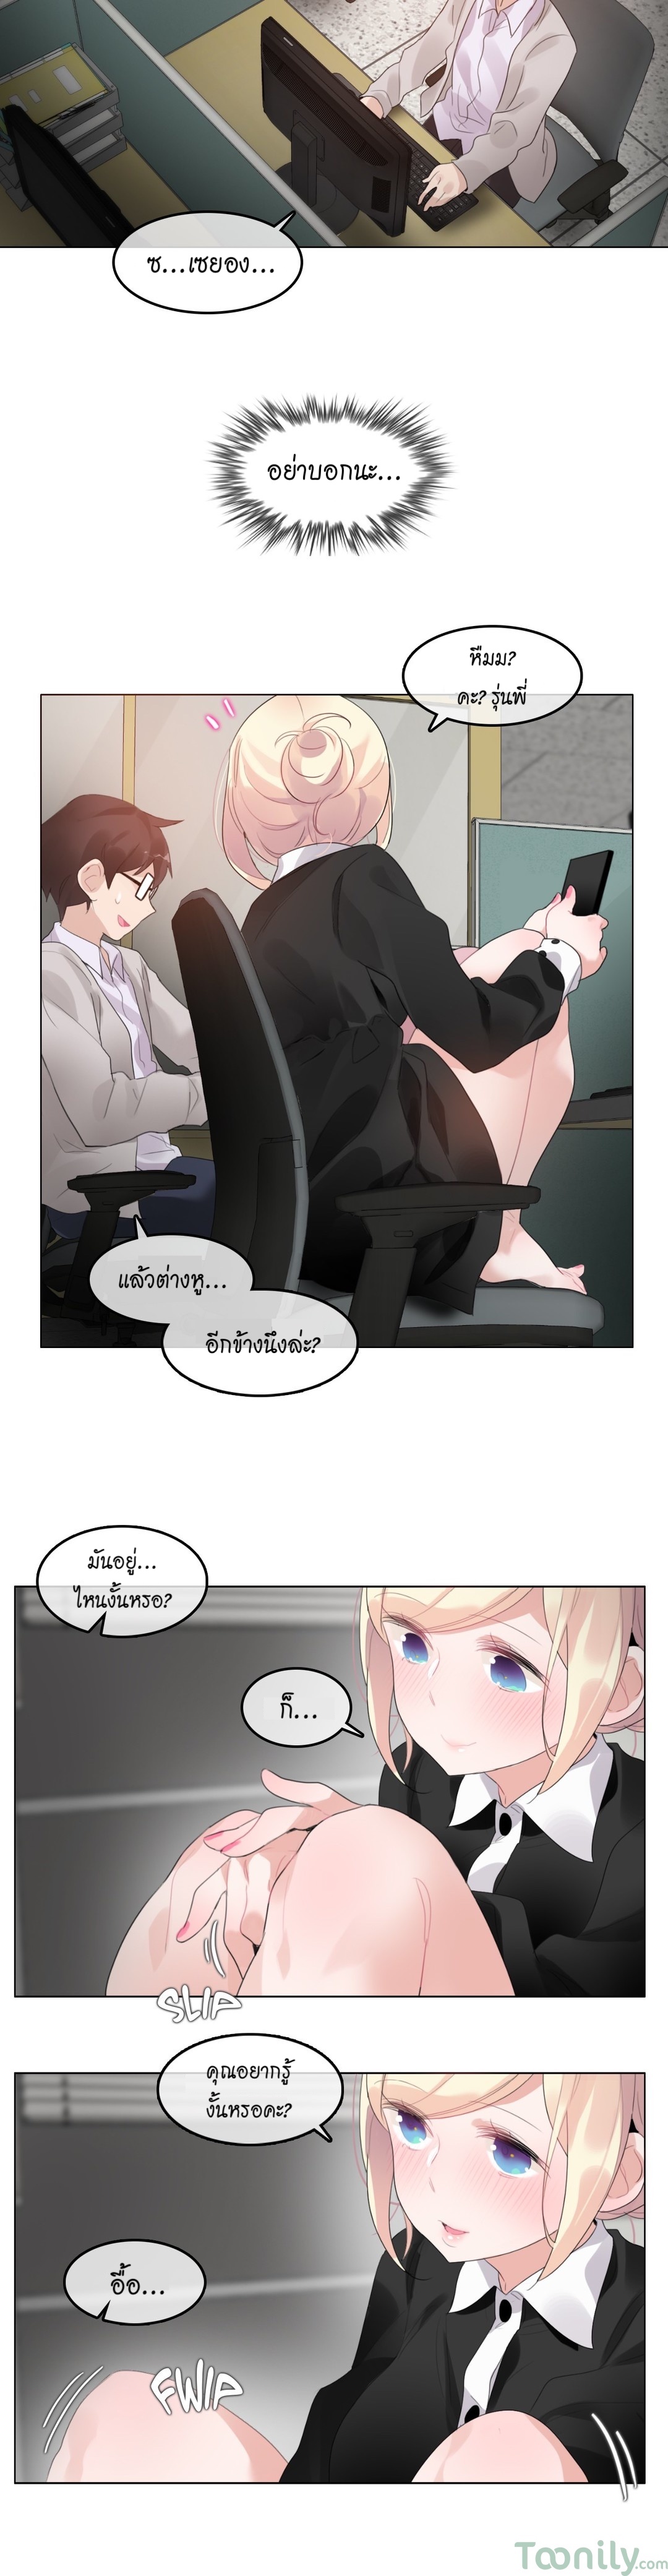 A Pervert’s Daily Life61 (17)